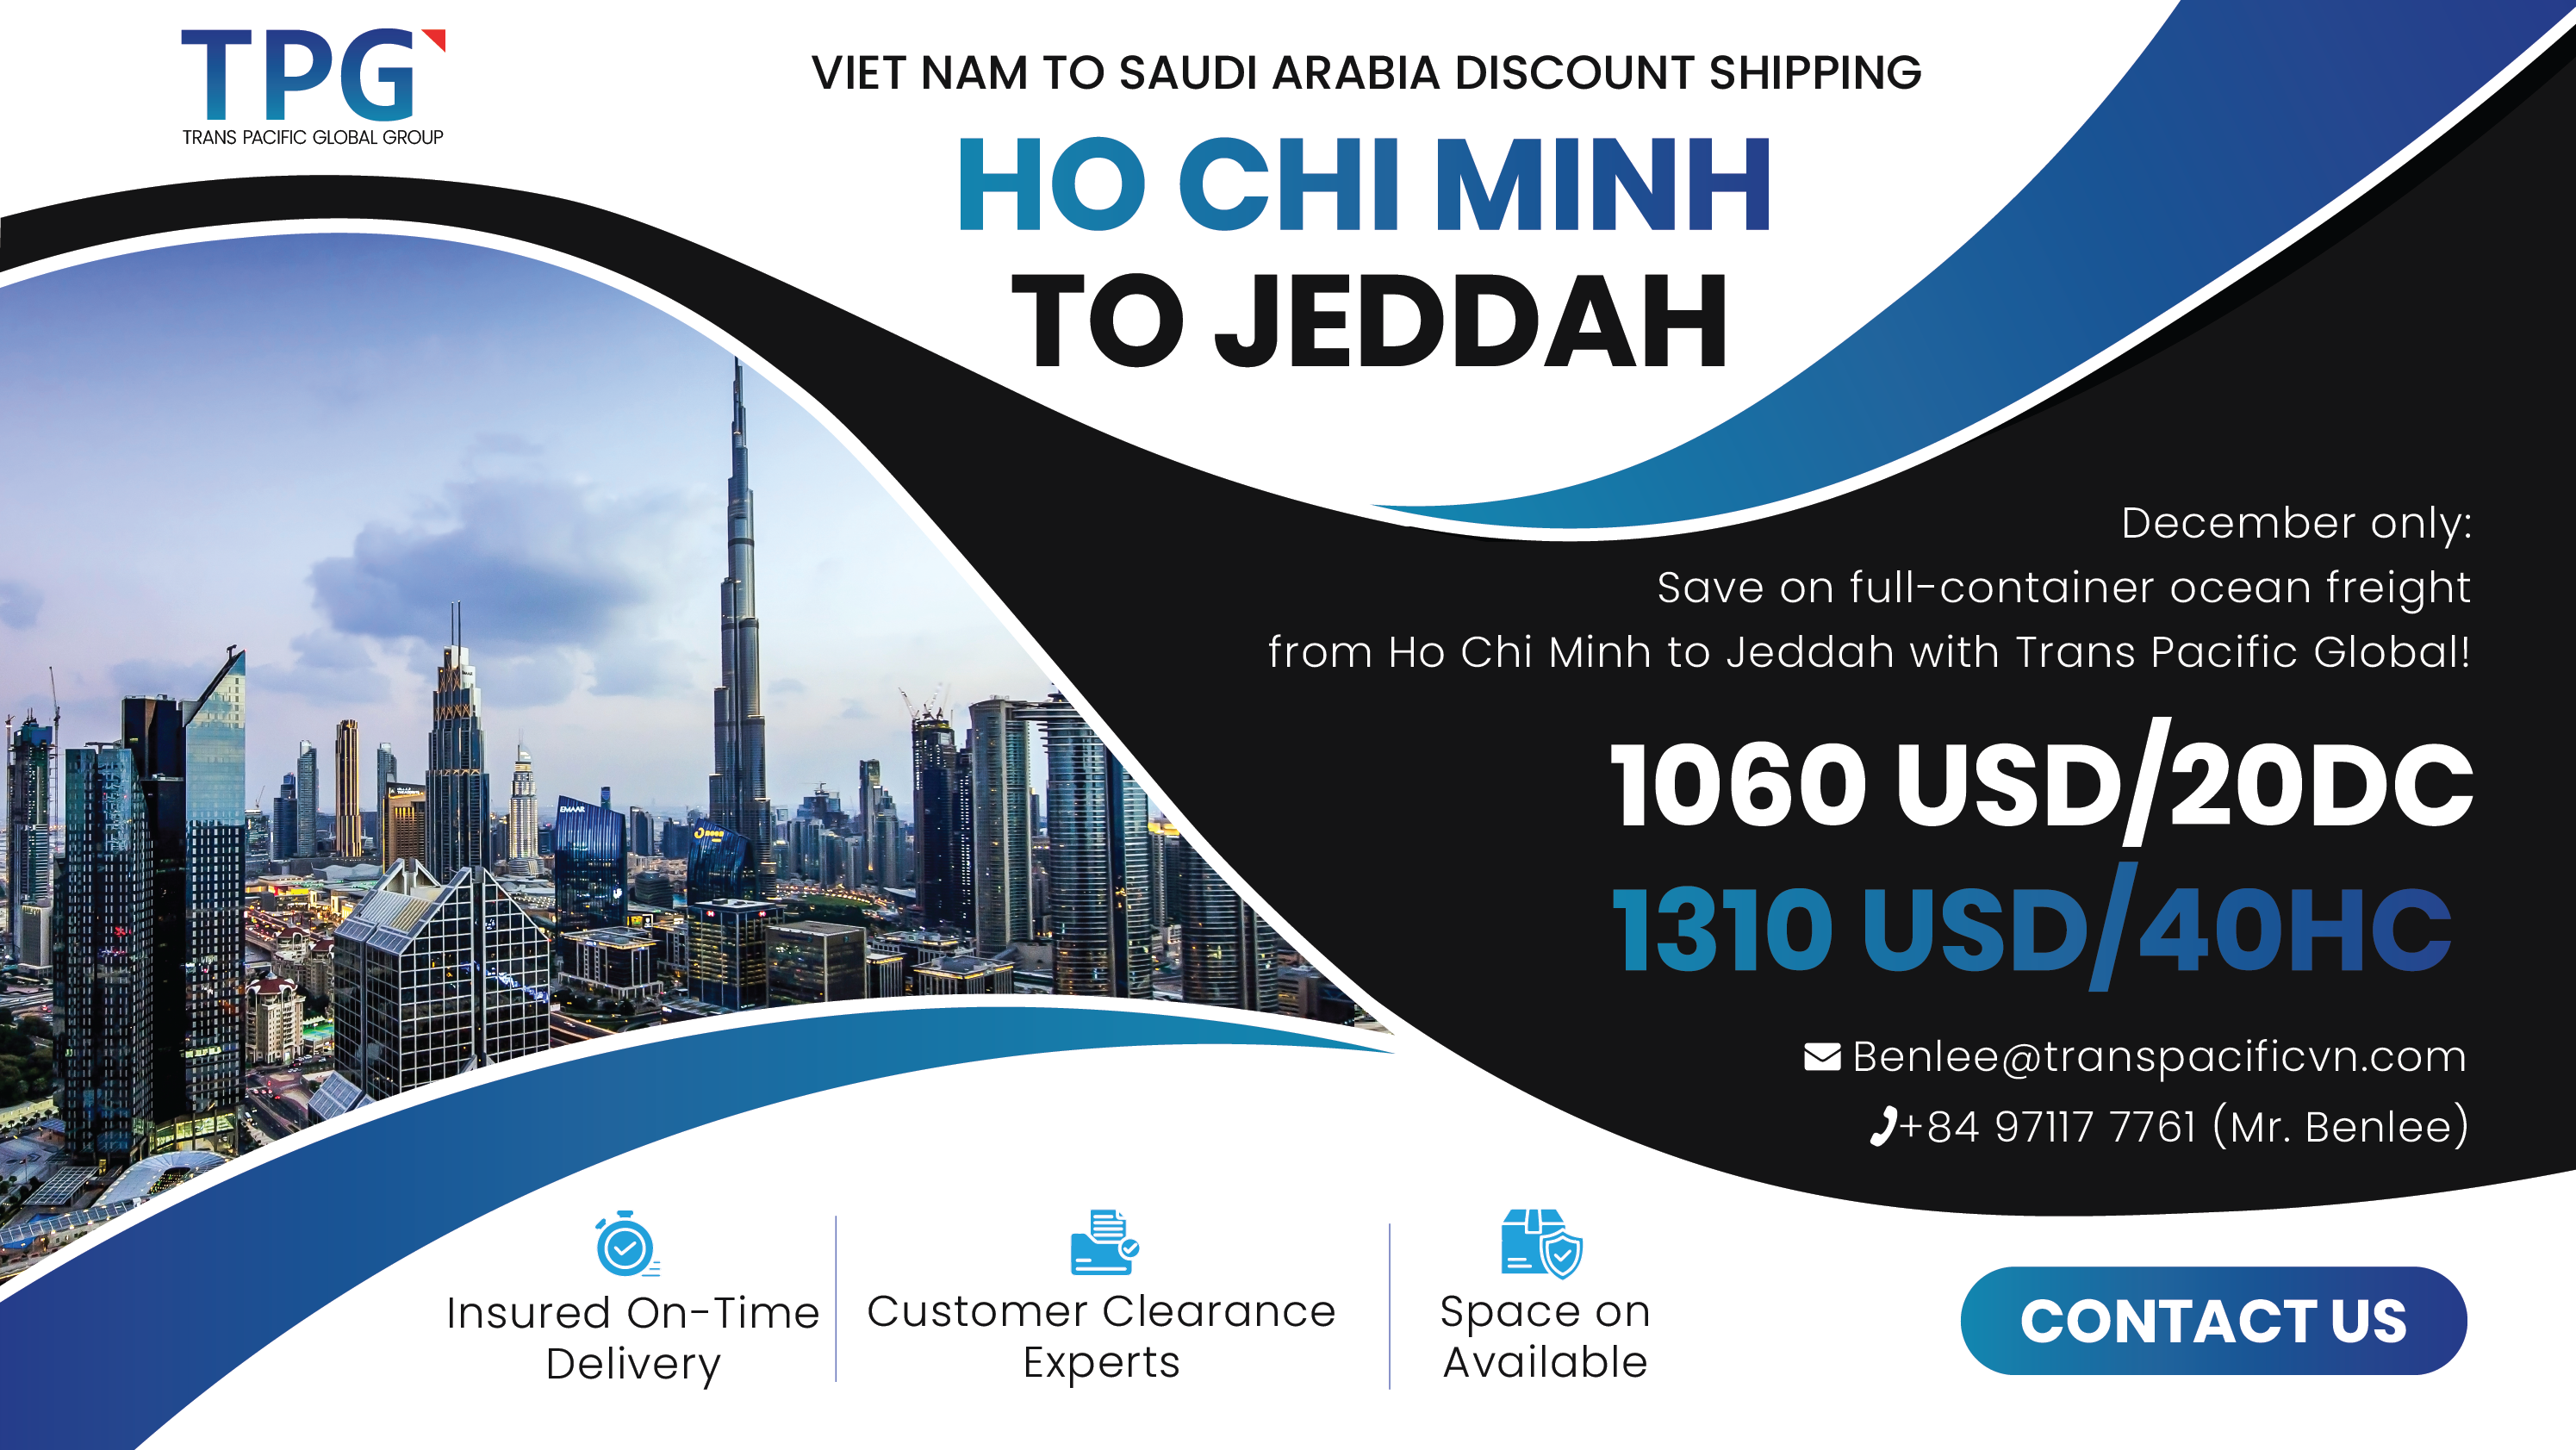 TPG offer special discount shipping price for the route: HCM to Jeddah, Saudi Arabia